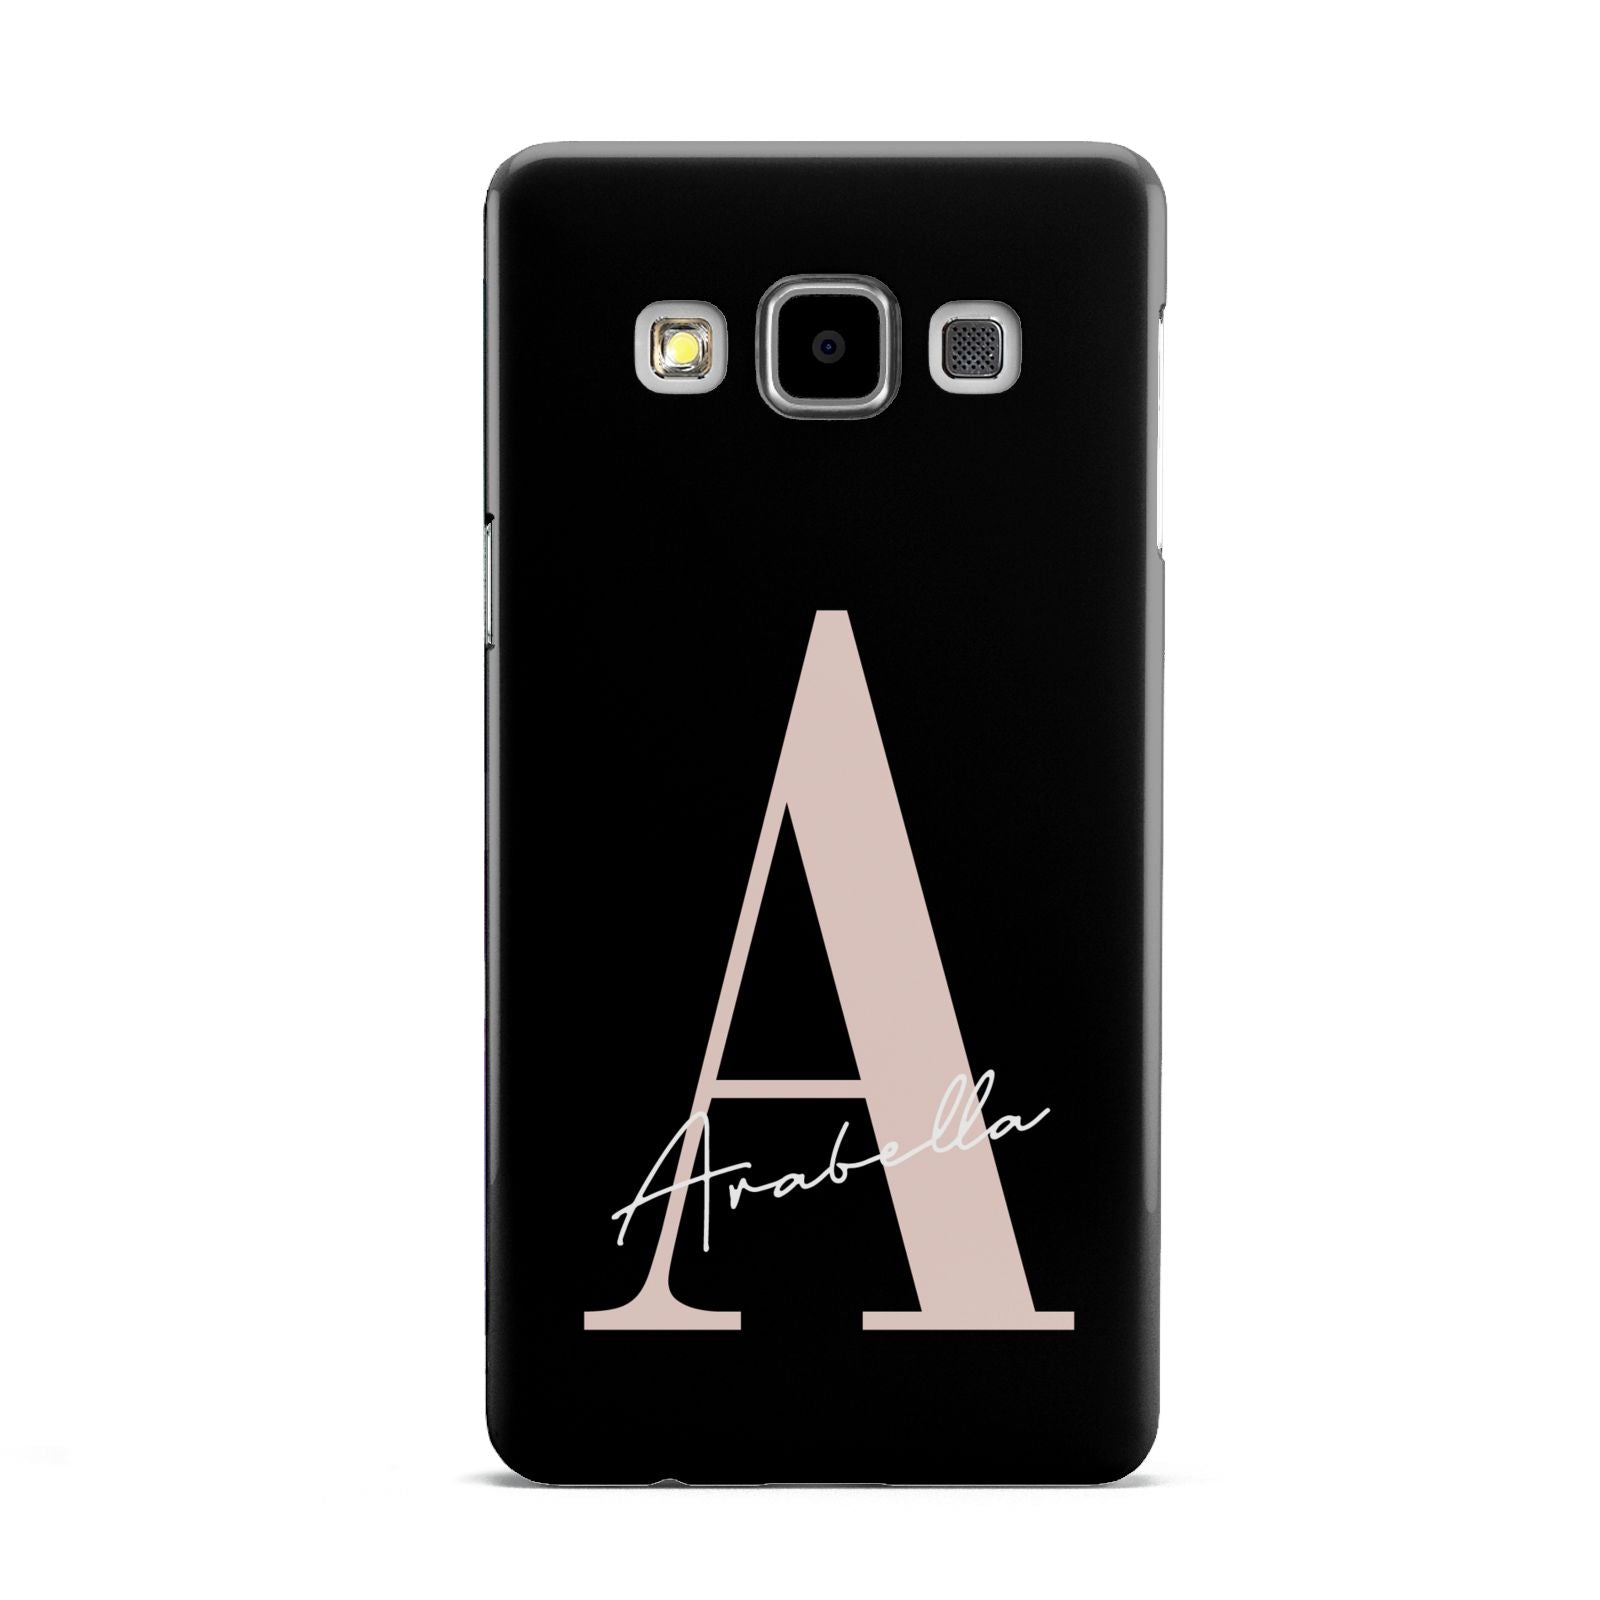 Personalised Black Pink Initial Samsung Galaxy A5 Case